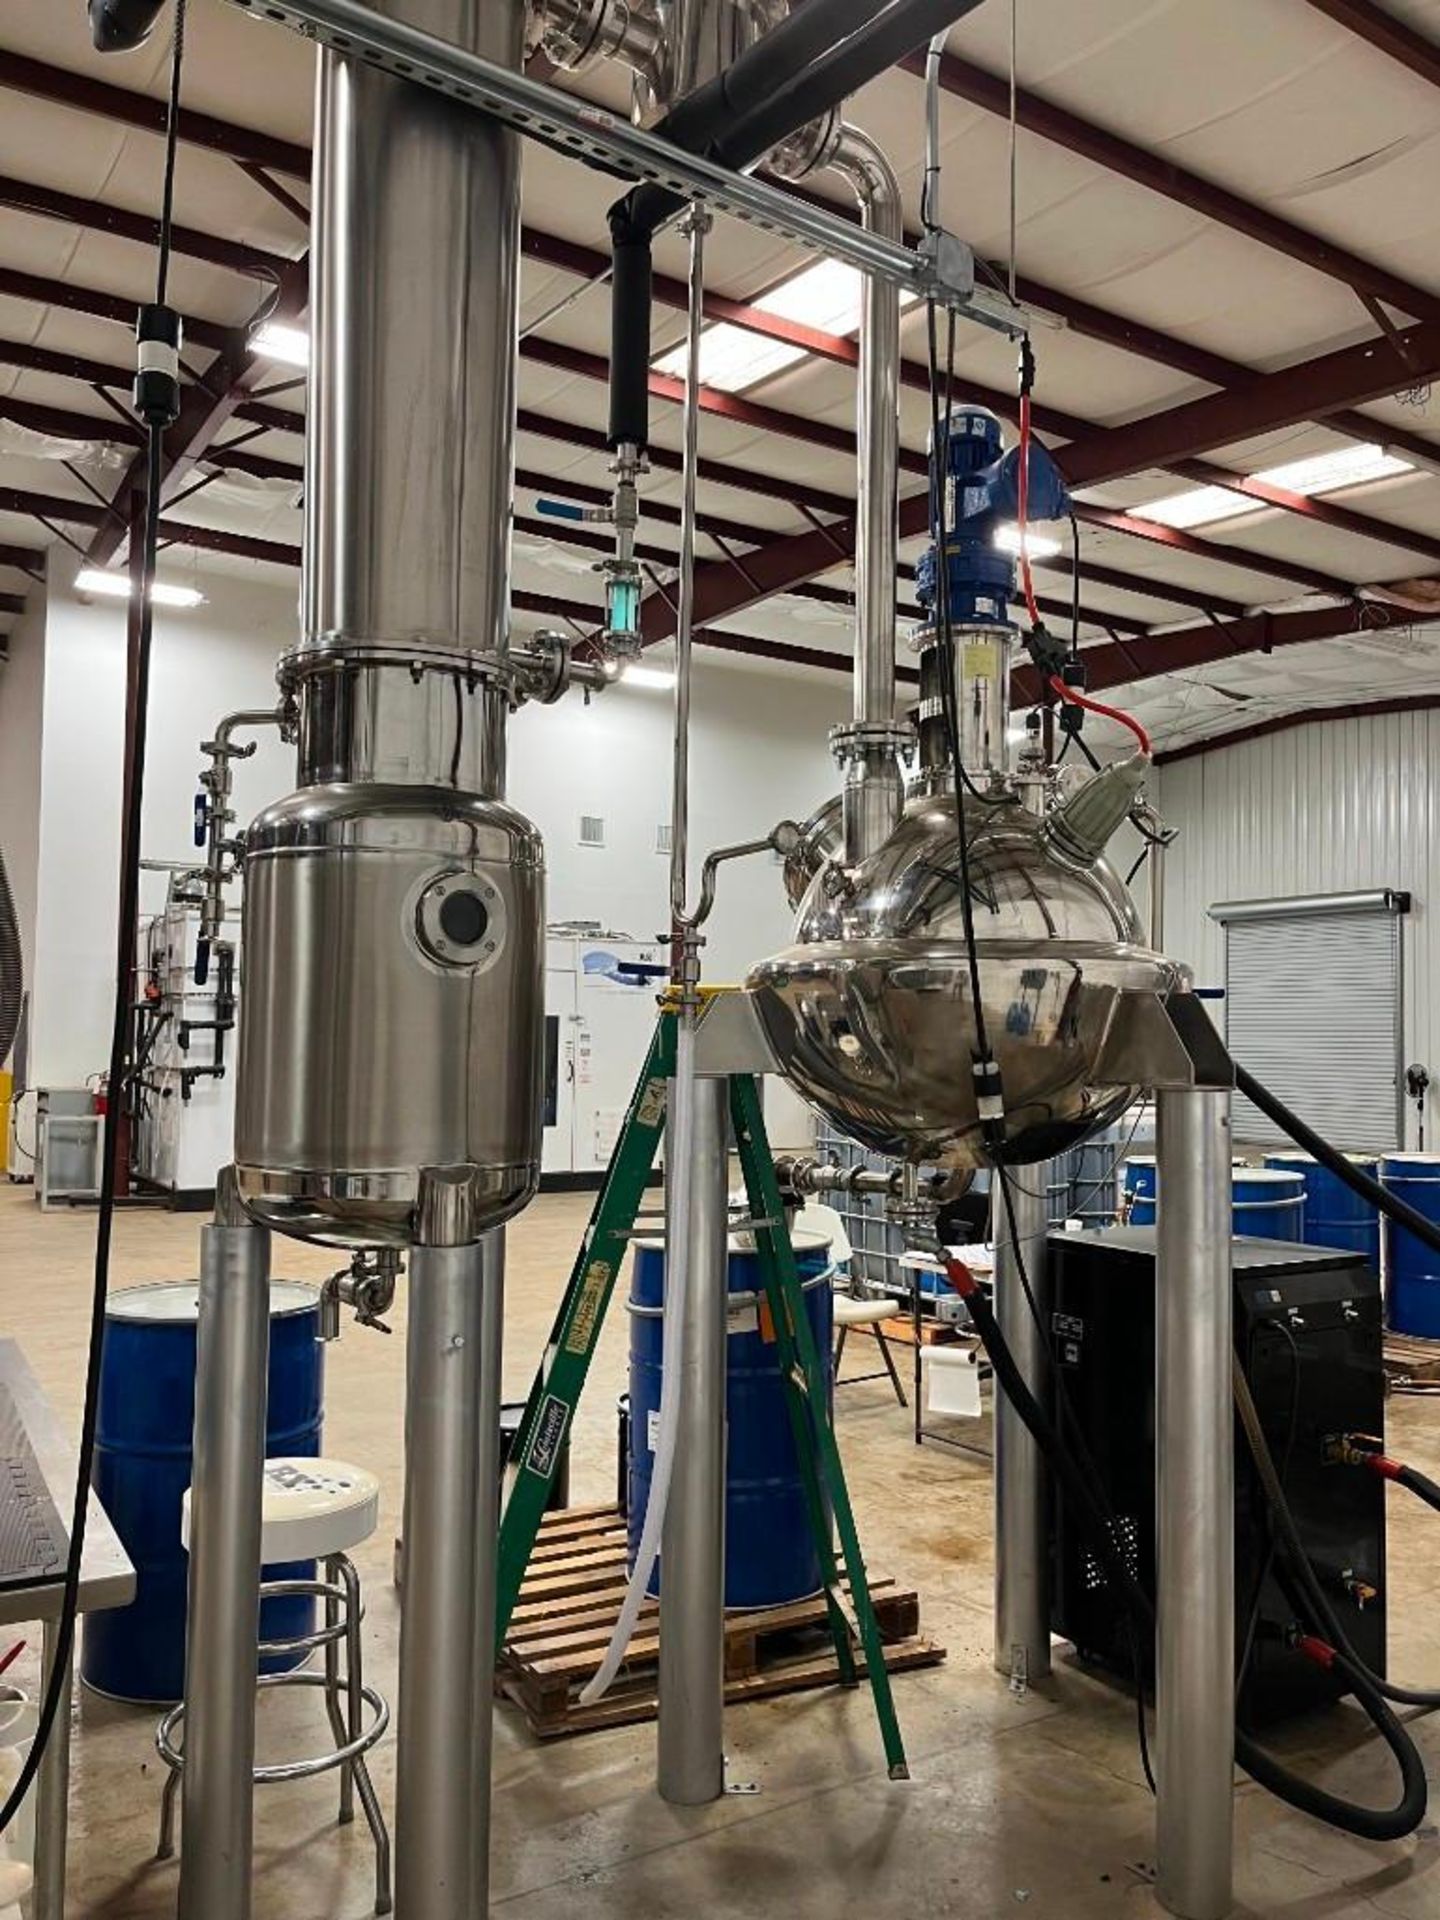 USA Lab Stainless Steel 120L Decarboxylation Sphere with In-line Cold Trap and Condensing Tower with - Image 5 of 10